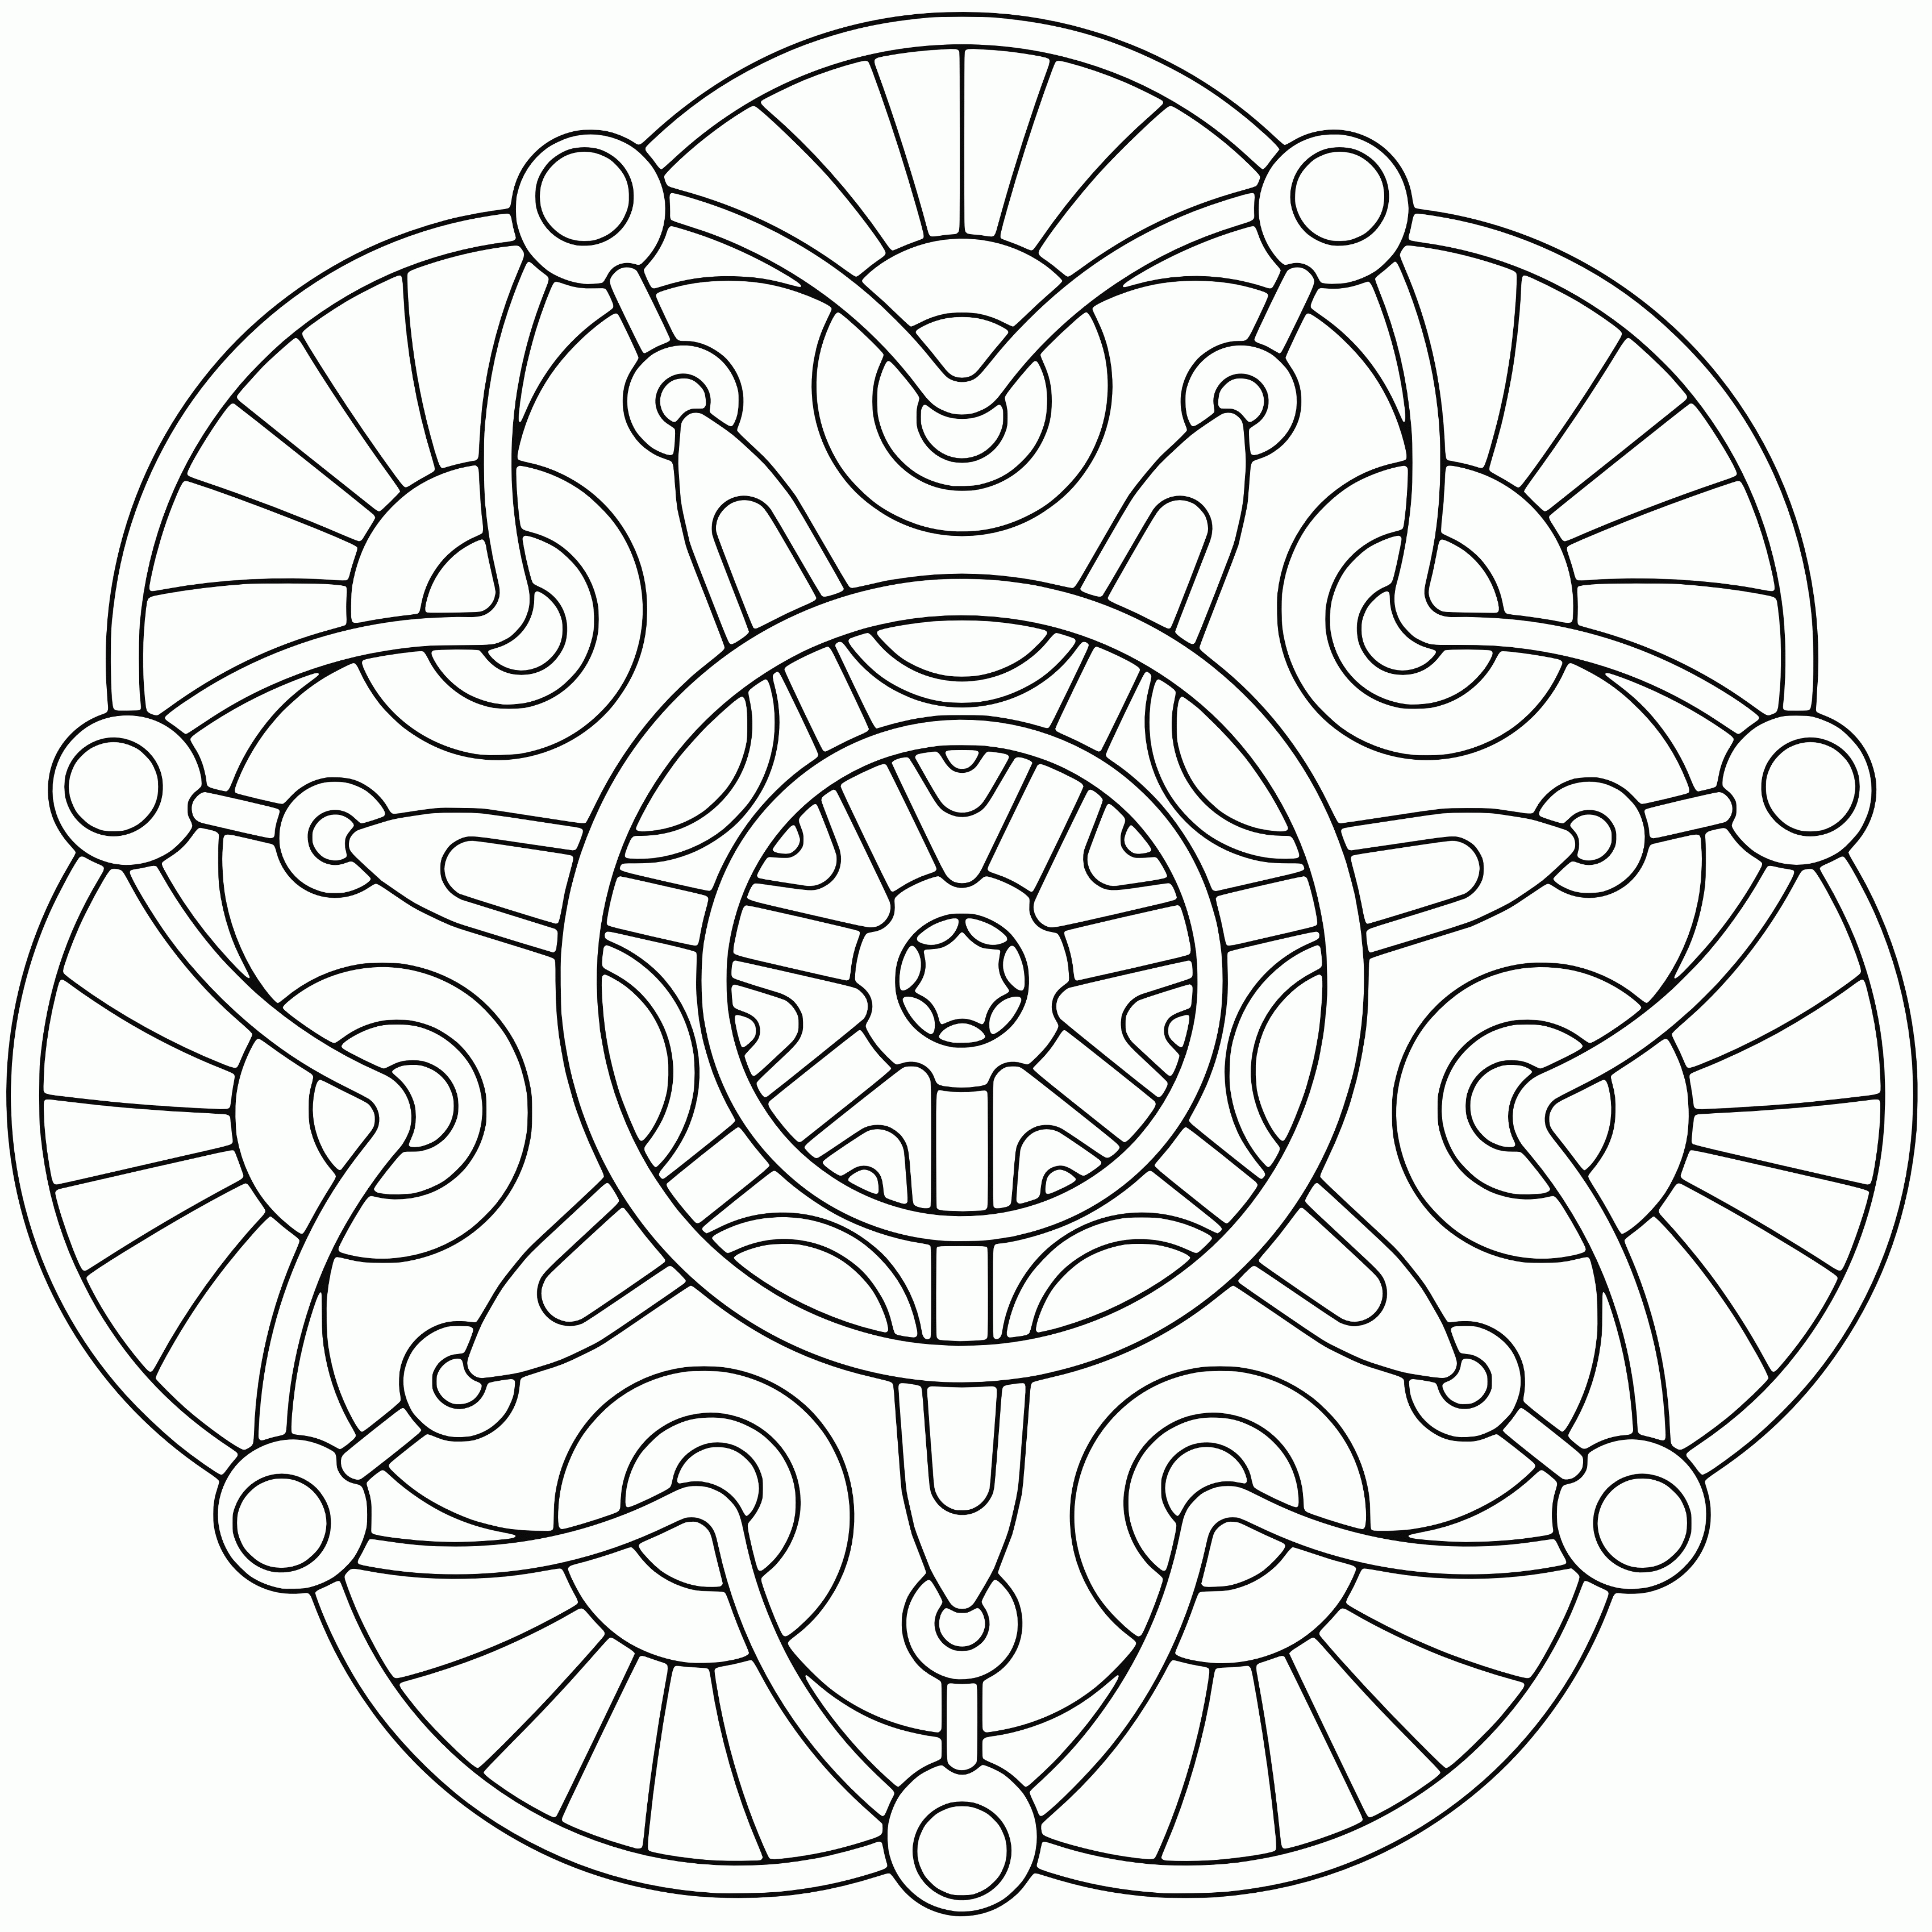 Coloring Pages: Free Printable Adult Coloring Pages Free Printable ...